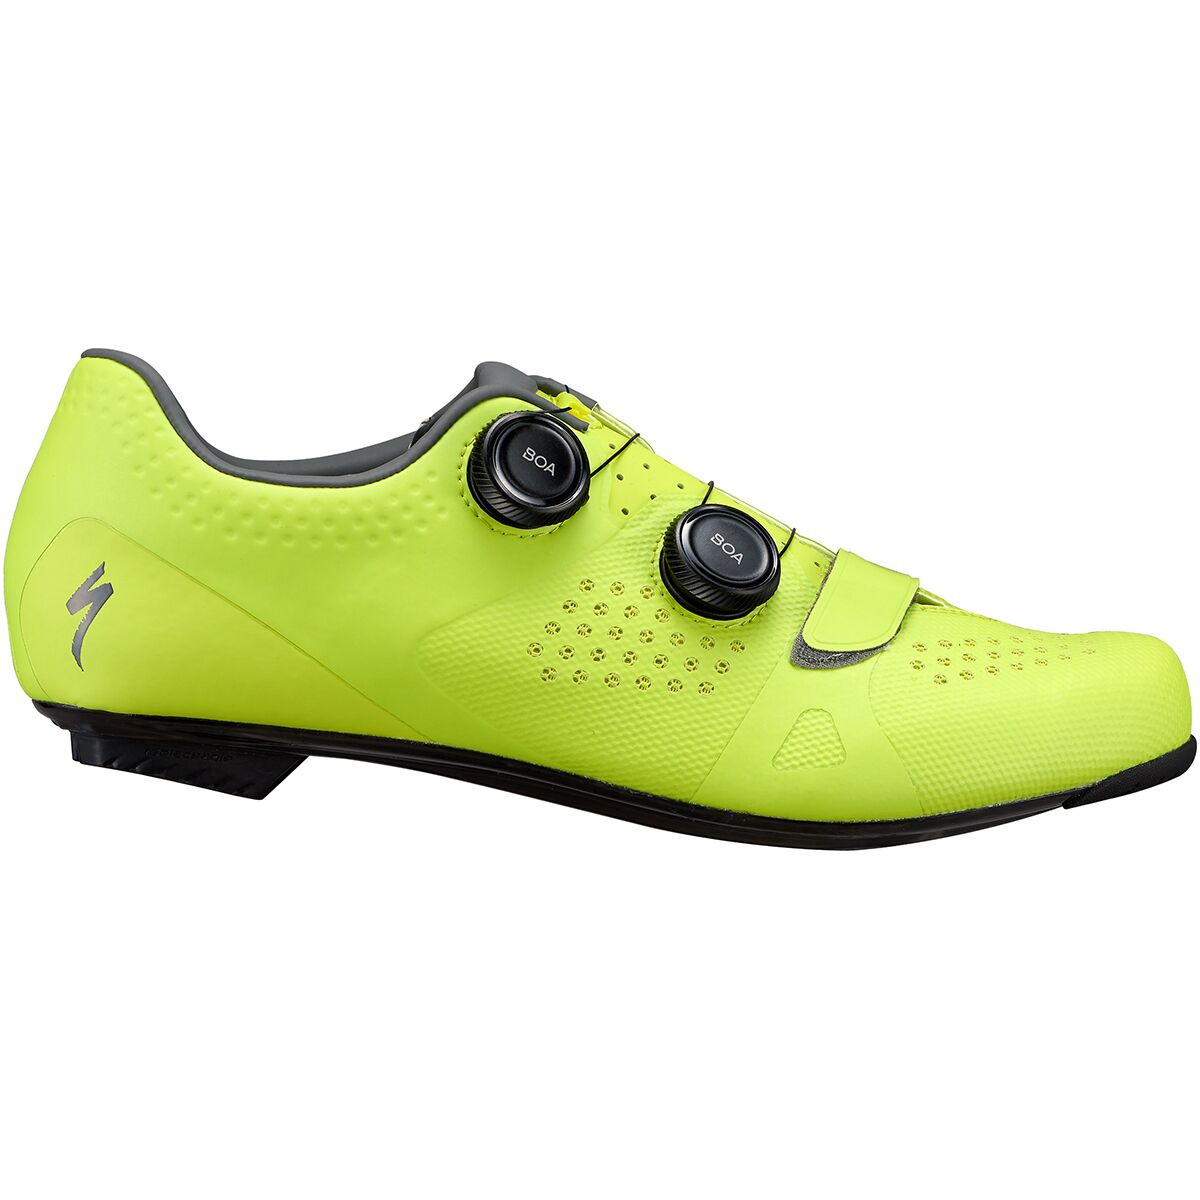 Specialized Torch 3.0 shoes review 